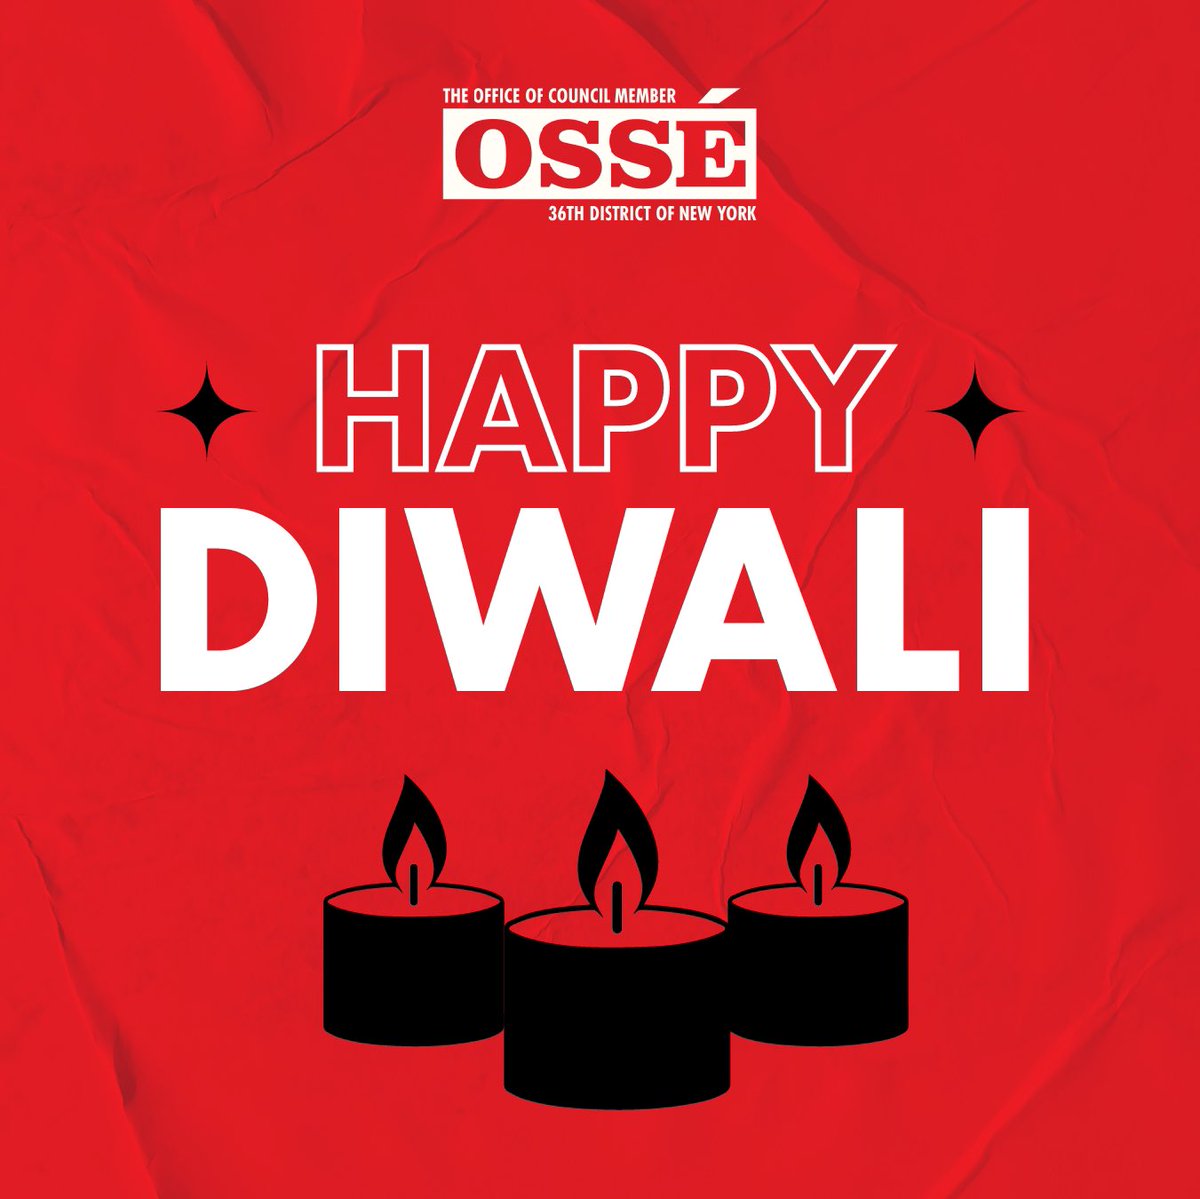 Wishing a Happy Diwali to all our neighbors observing today!